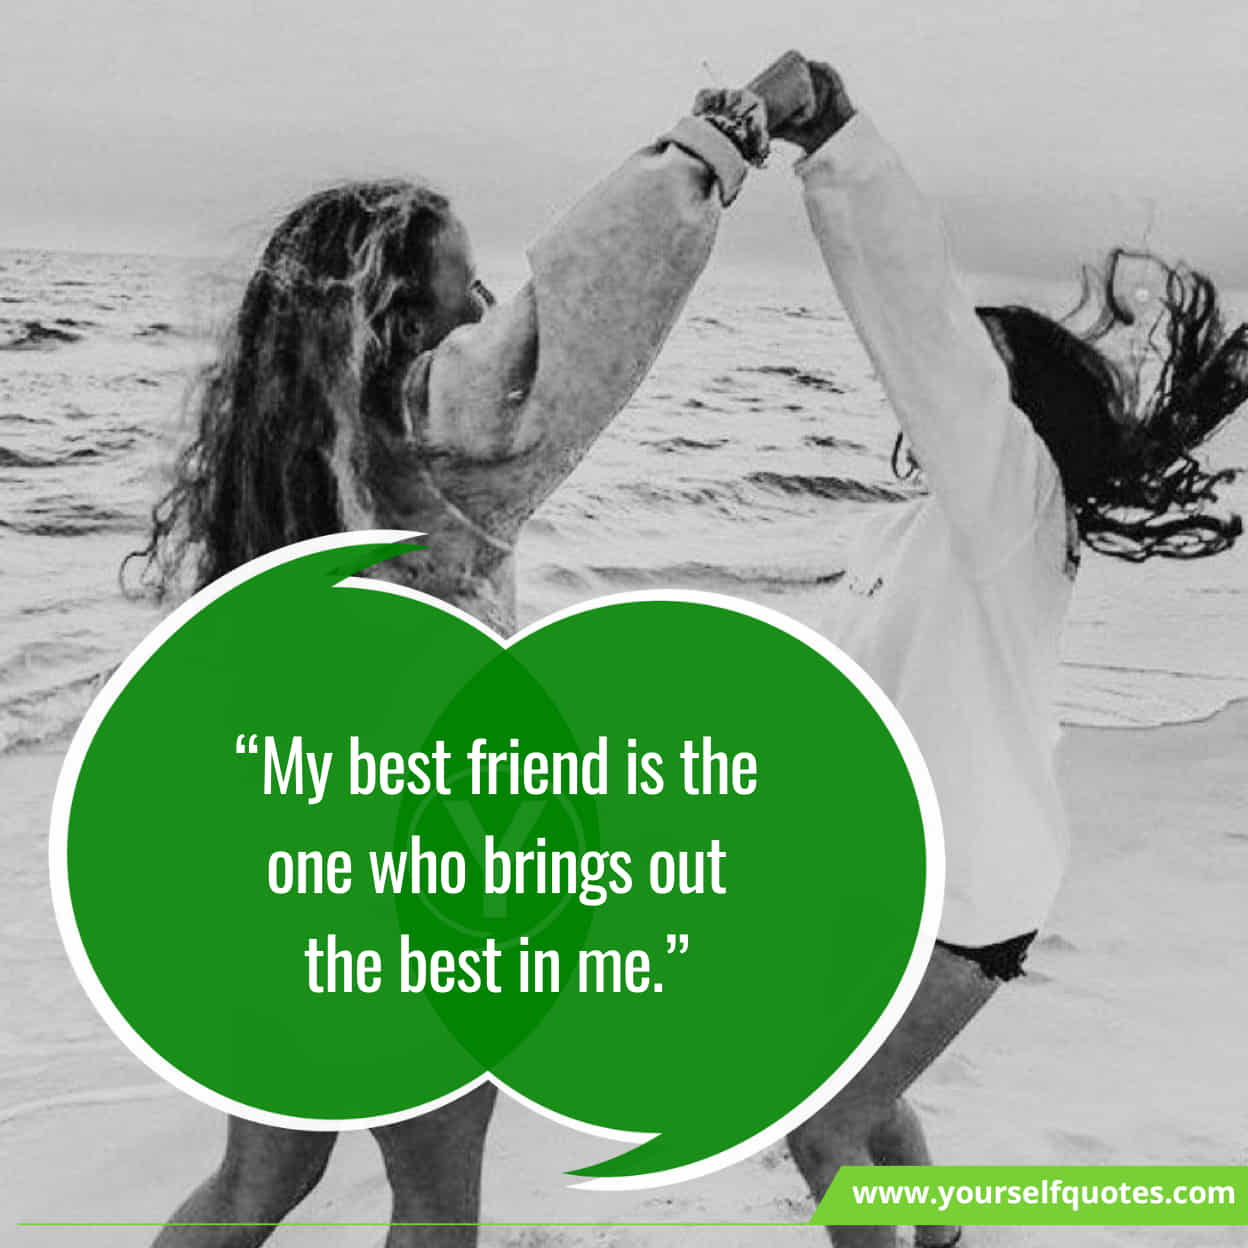 Friendship Day Inspirational Quotes 